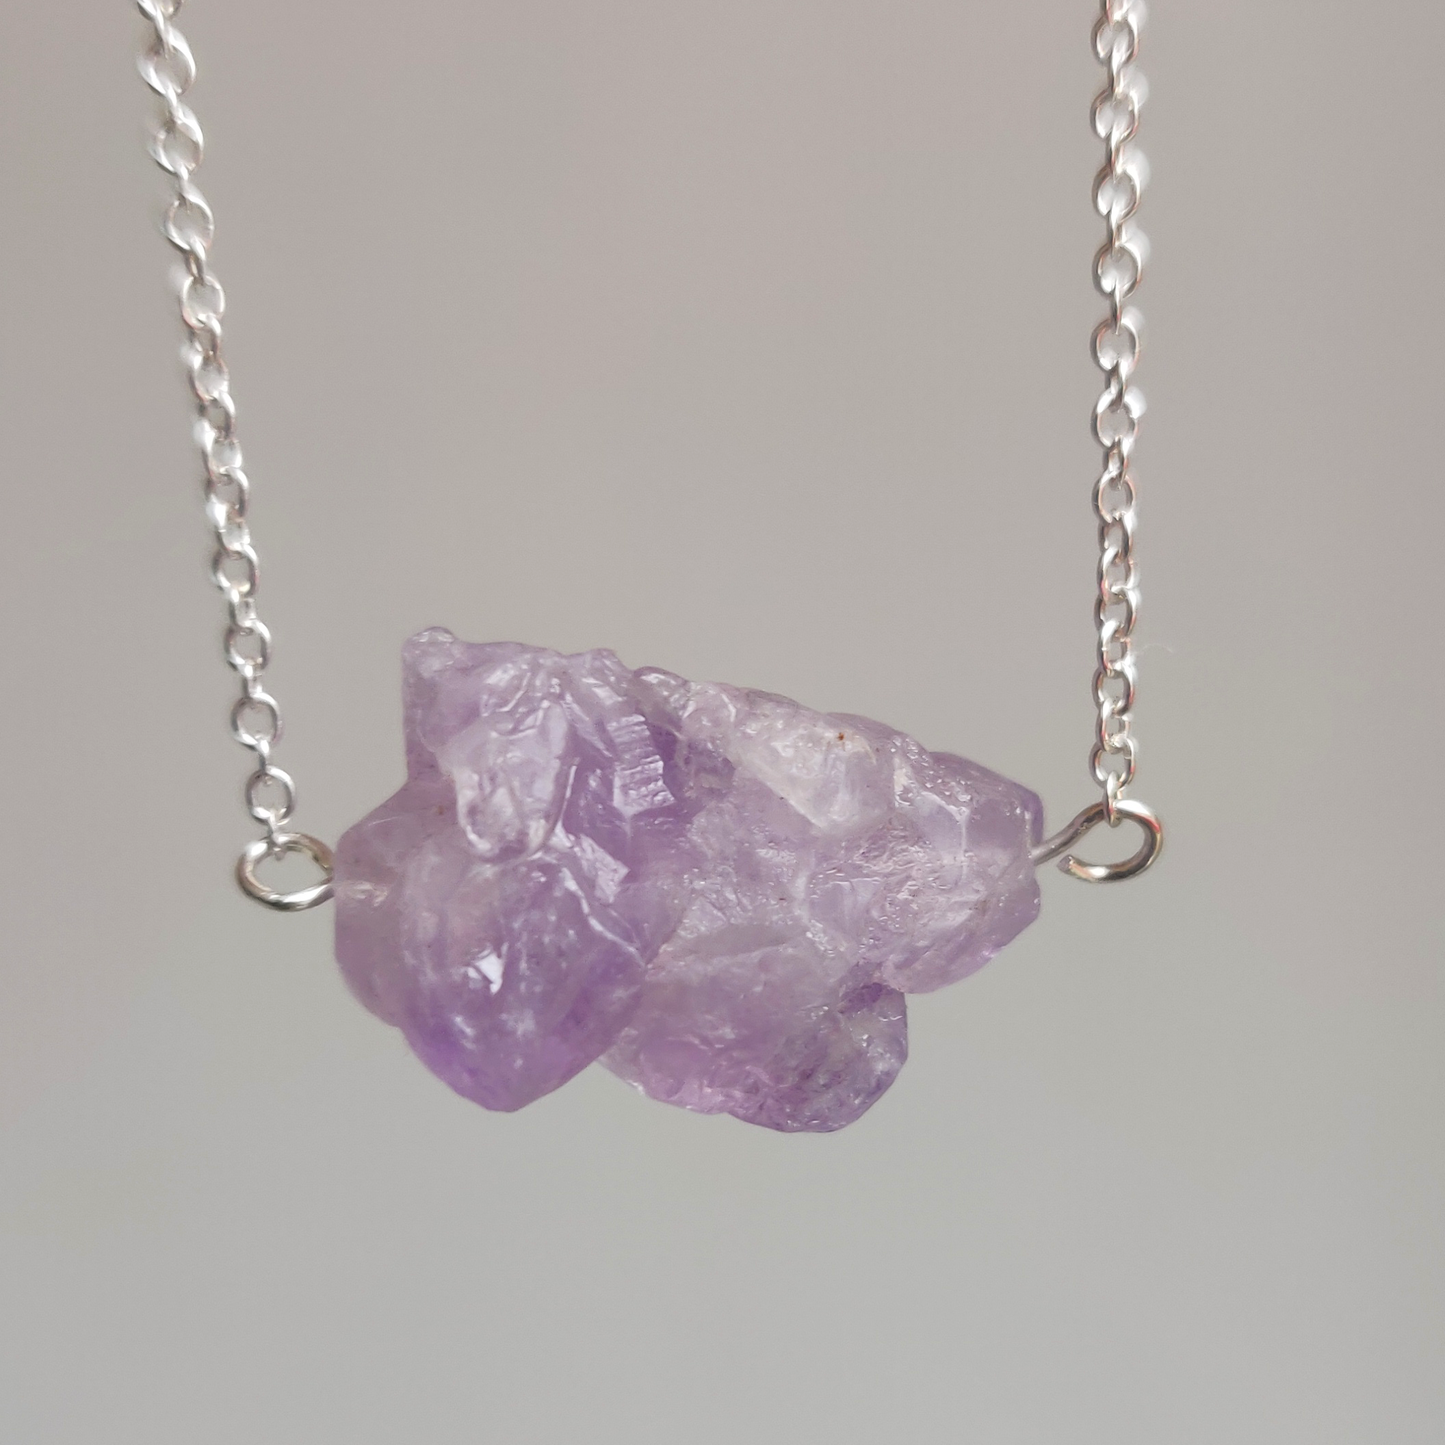 Amethyst Necklace - 925 Sterling Silver